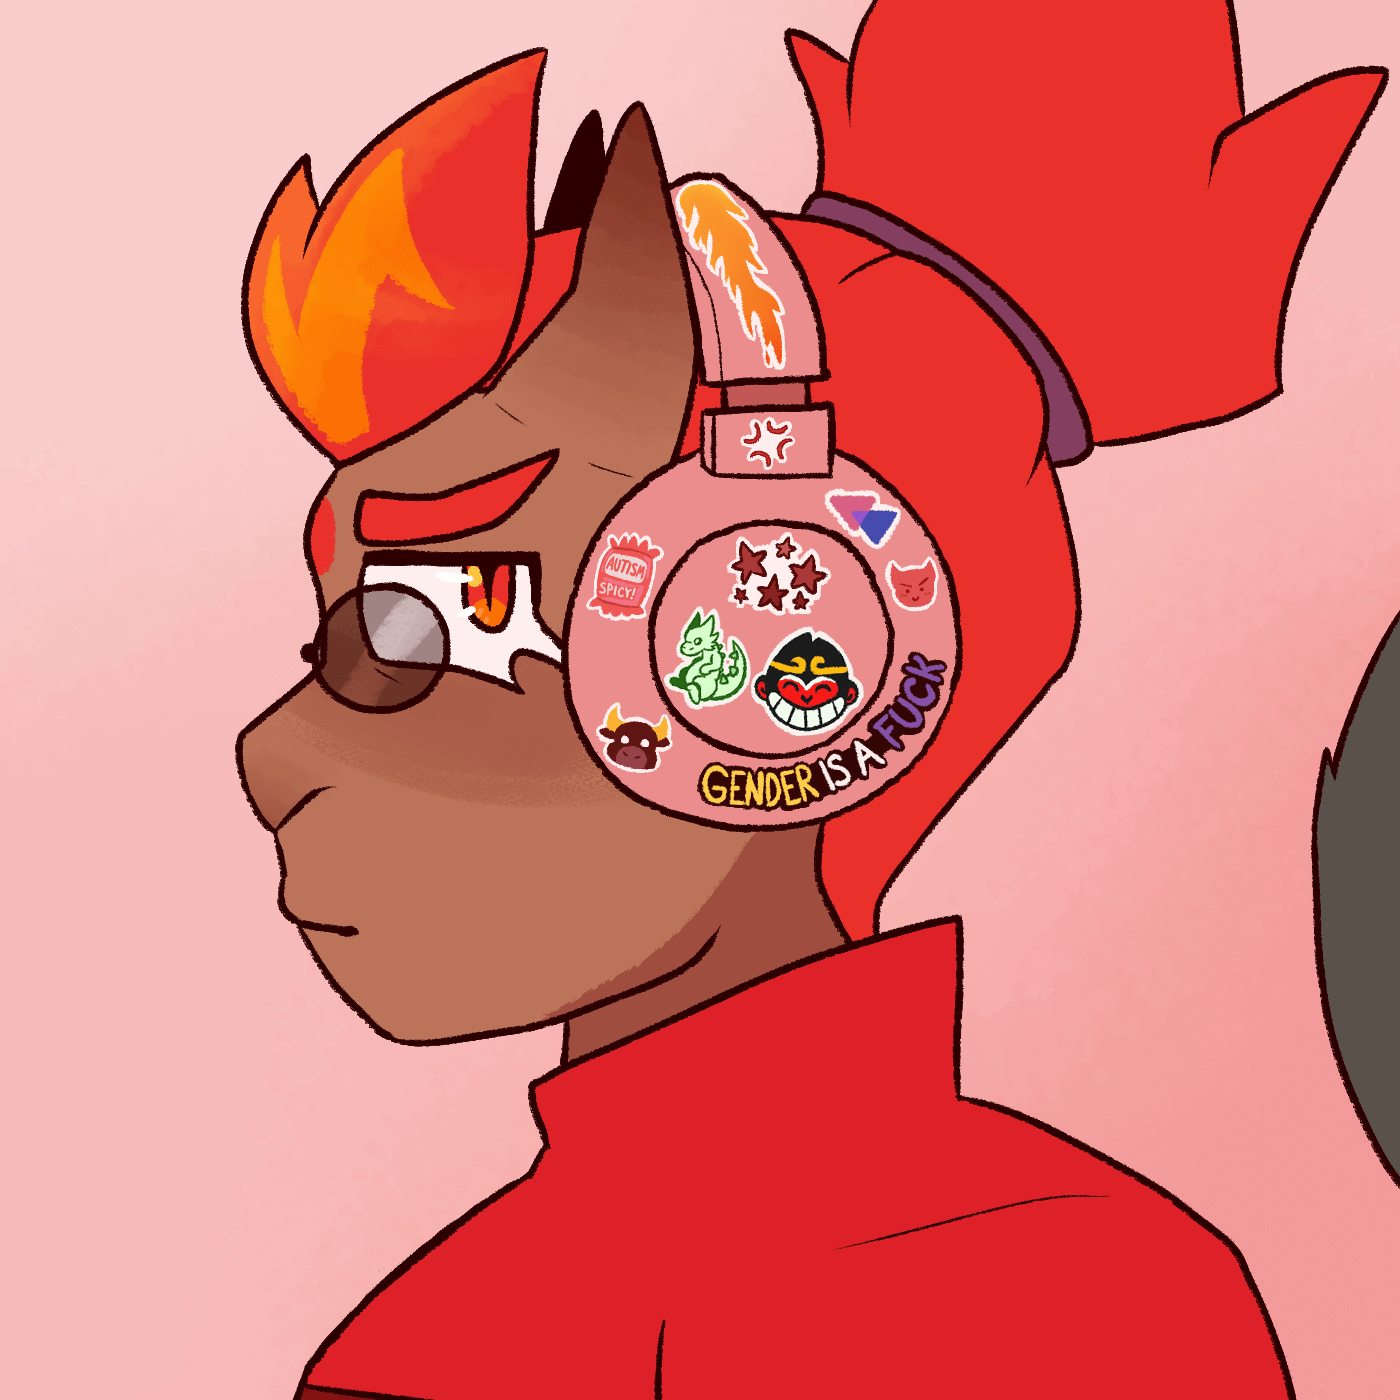 Fanart of Red SOn wearing red headphones. It's a side view, and he's frowning at the viewer. His headphones have a number of stickers on it, including ones of bull, a vein often used to symbolize anger, the bisexual triangles, one that says 'gender is a fuck' in nonbinary pride colors, and a sauce packet that says 'autism' on it, with a label underneath calling it spicy. In the middle of the visible ear cover to our side, there is a sticker of the smiling monkey symbol from MK's jacket,, and a green dragon.